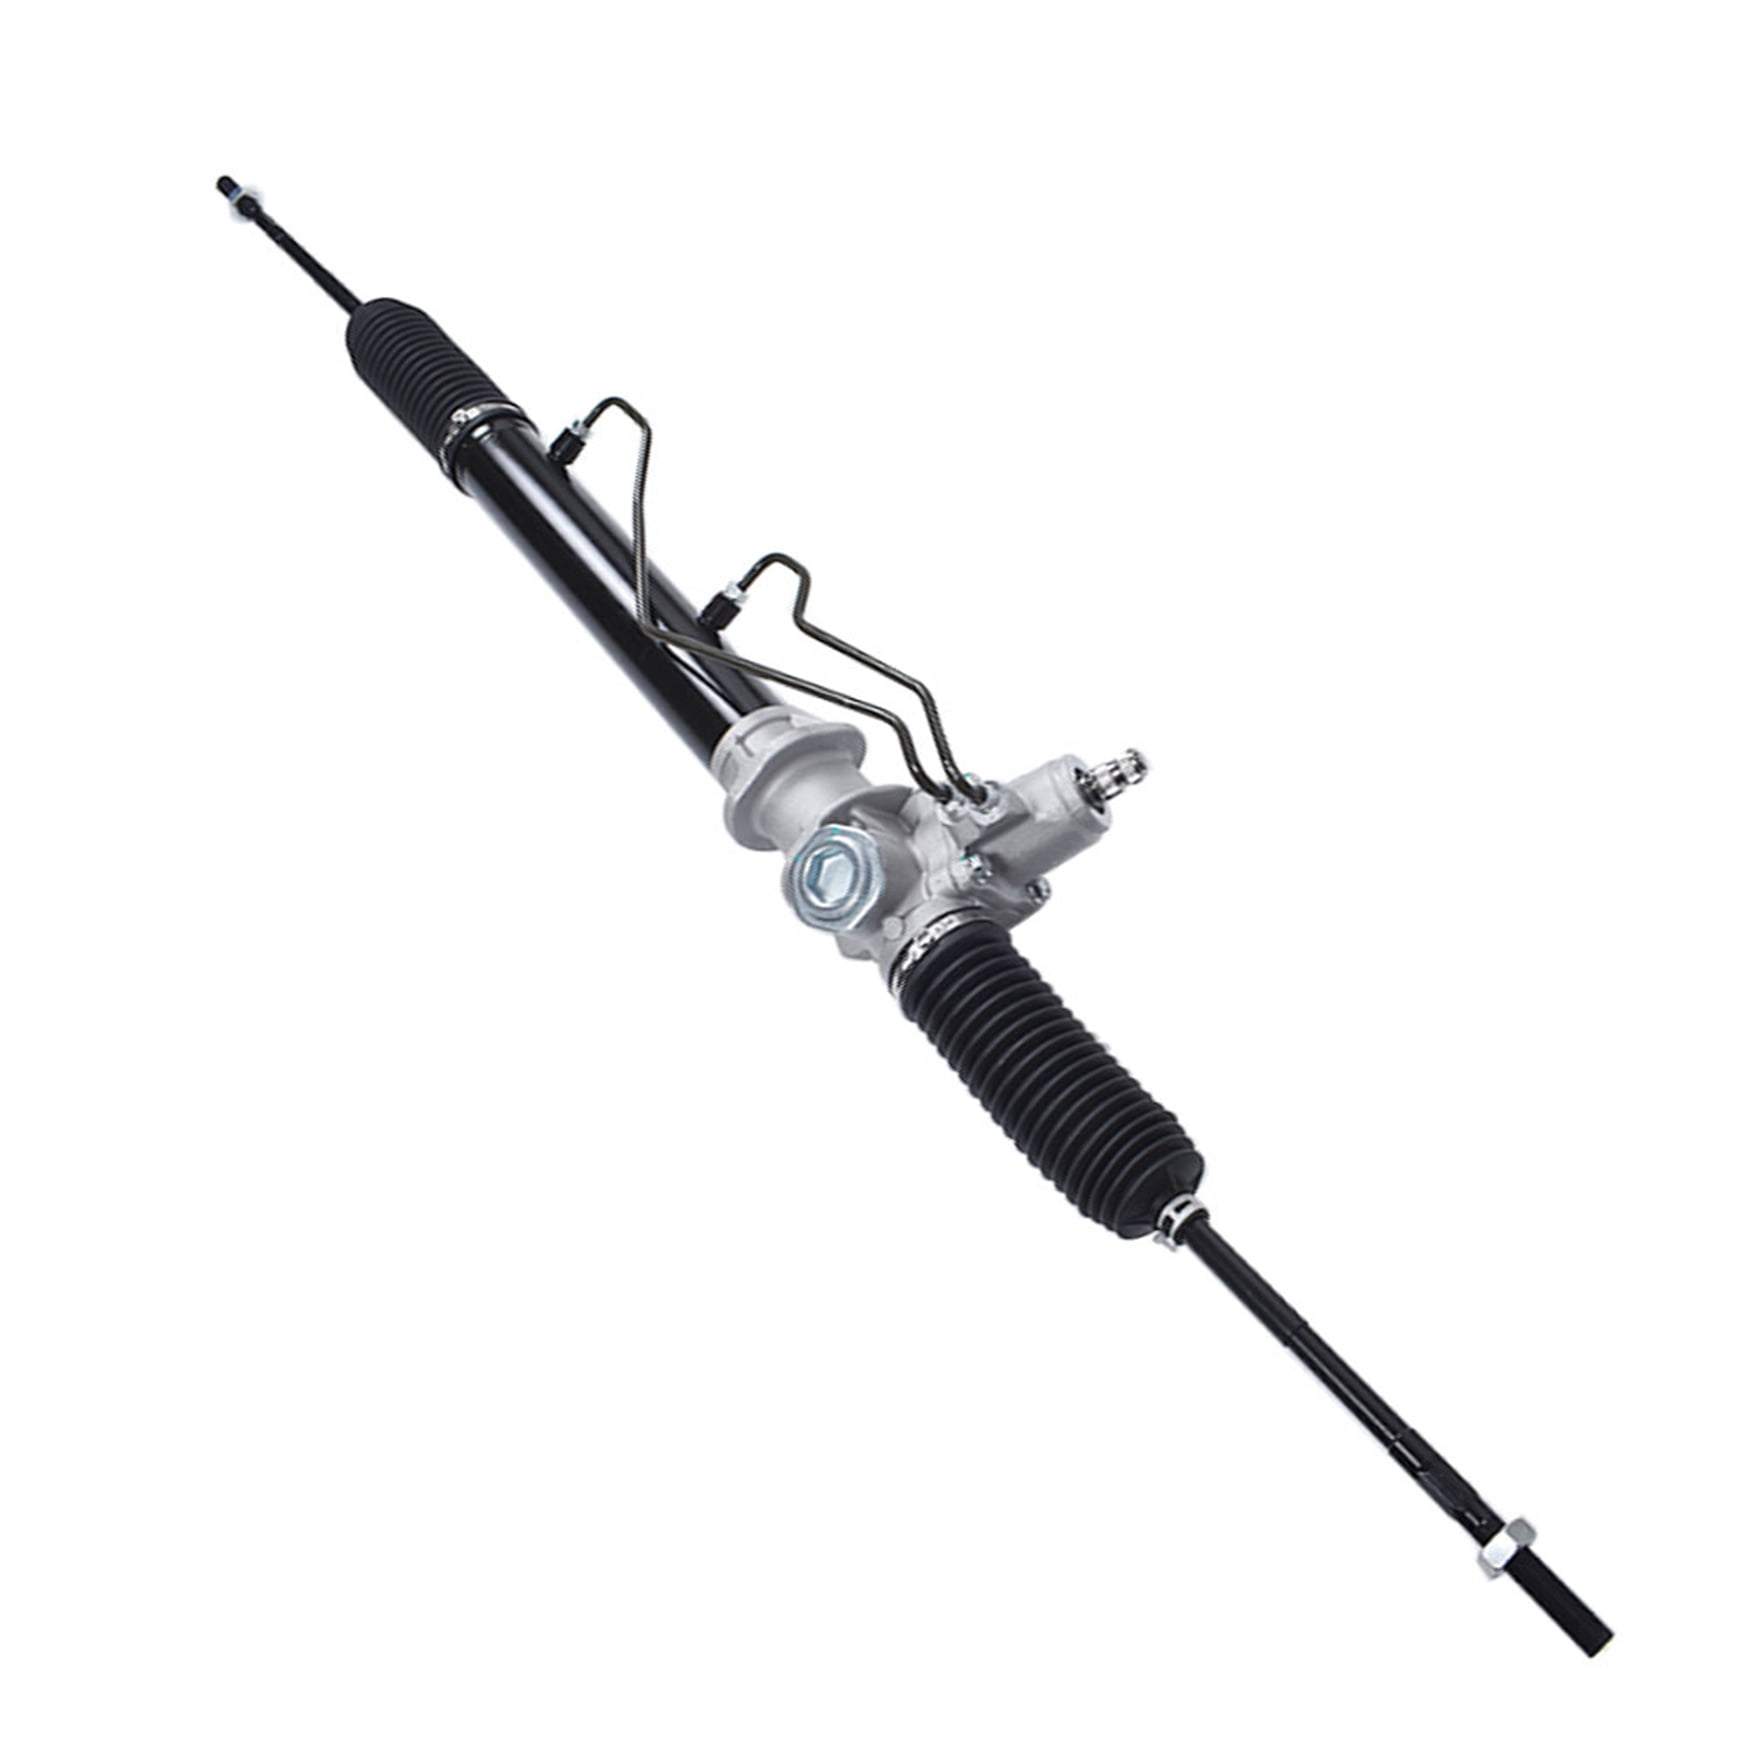 Replaces OE 49001-0W015 Nissan Pathfinde Complete Power Steering Rack and Pinion Assembly Fit for Infiniti QX4 Rack and Pinion 